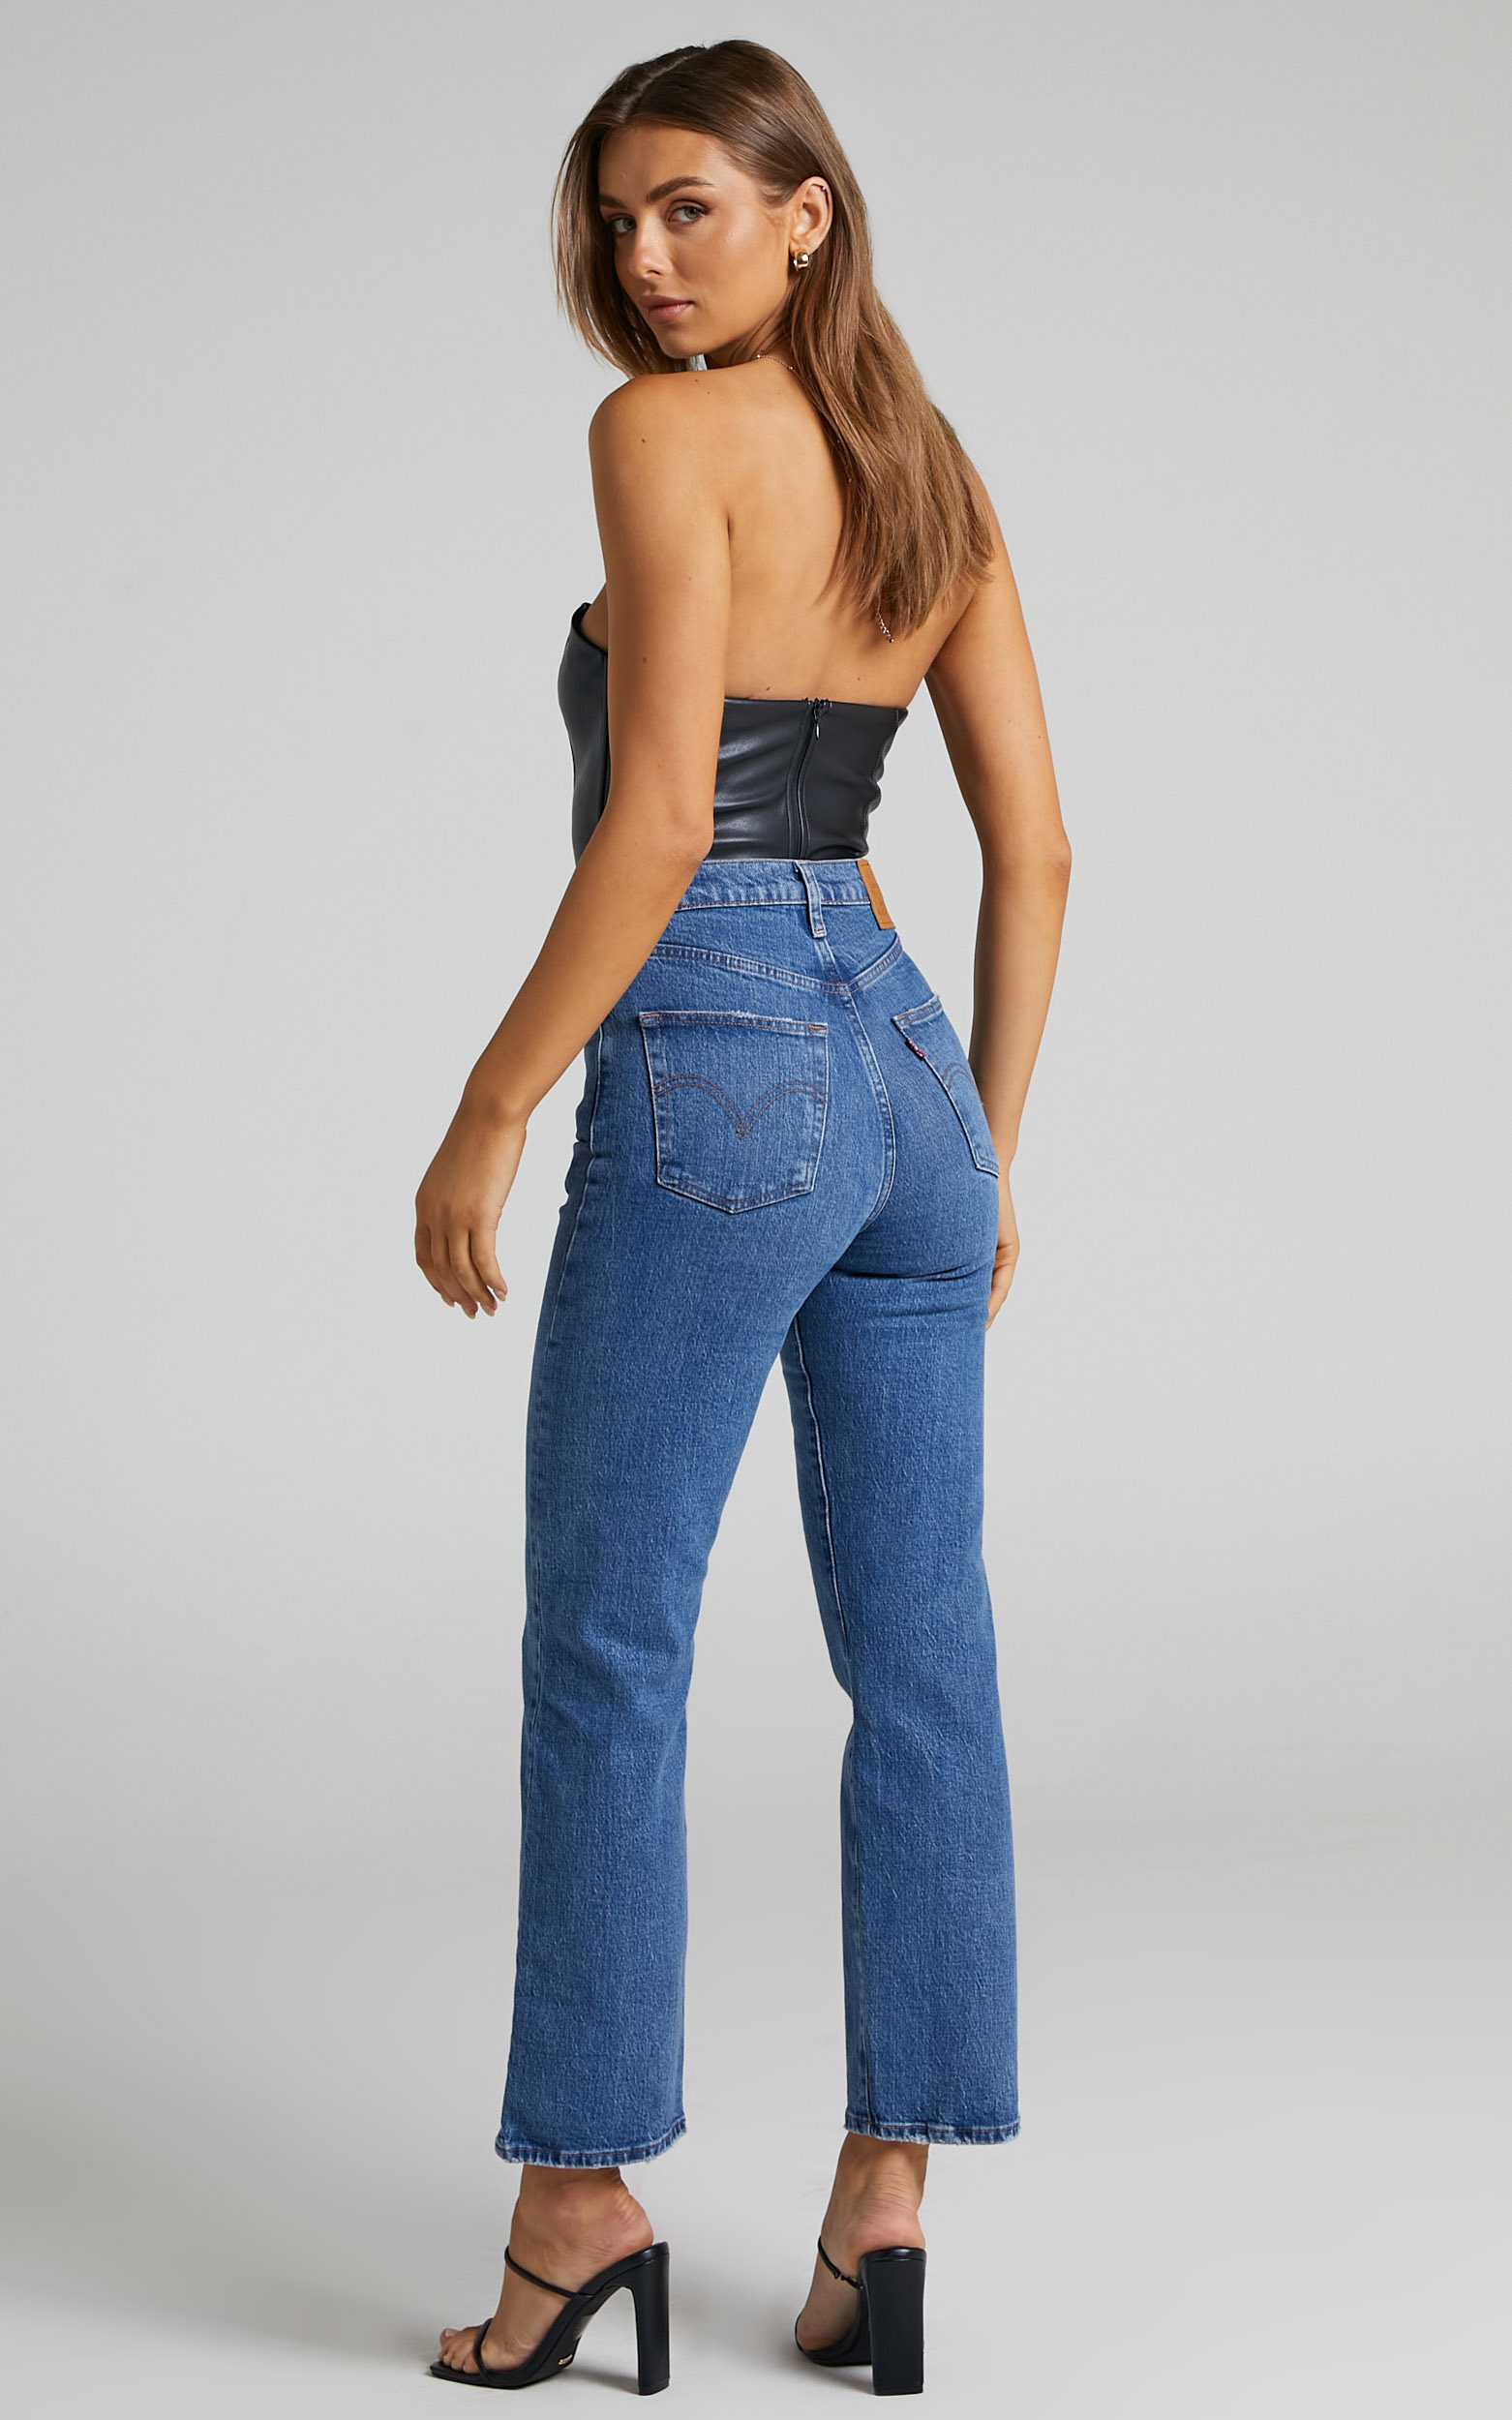 Levi's - Ribcage Straight Ankle Jeans in Jazz Jive Together | Showpo